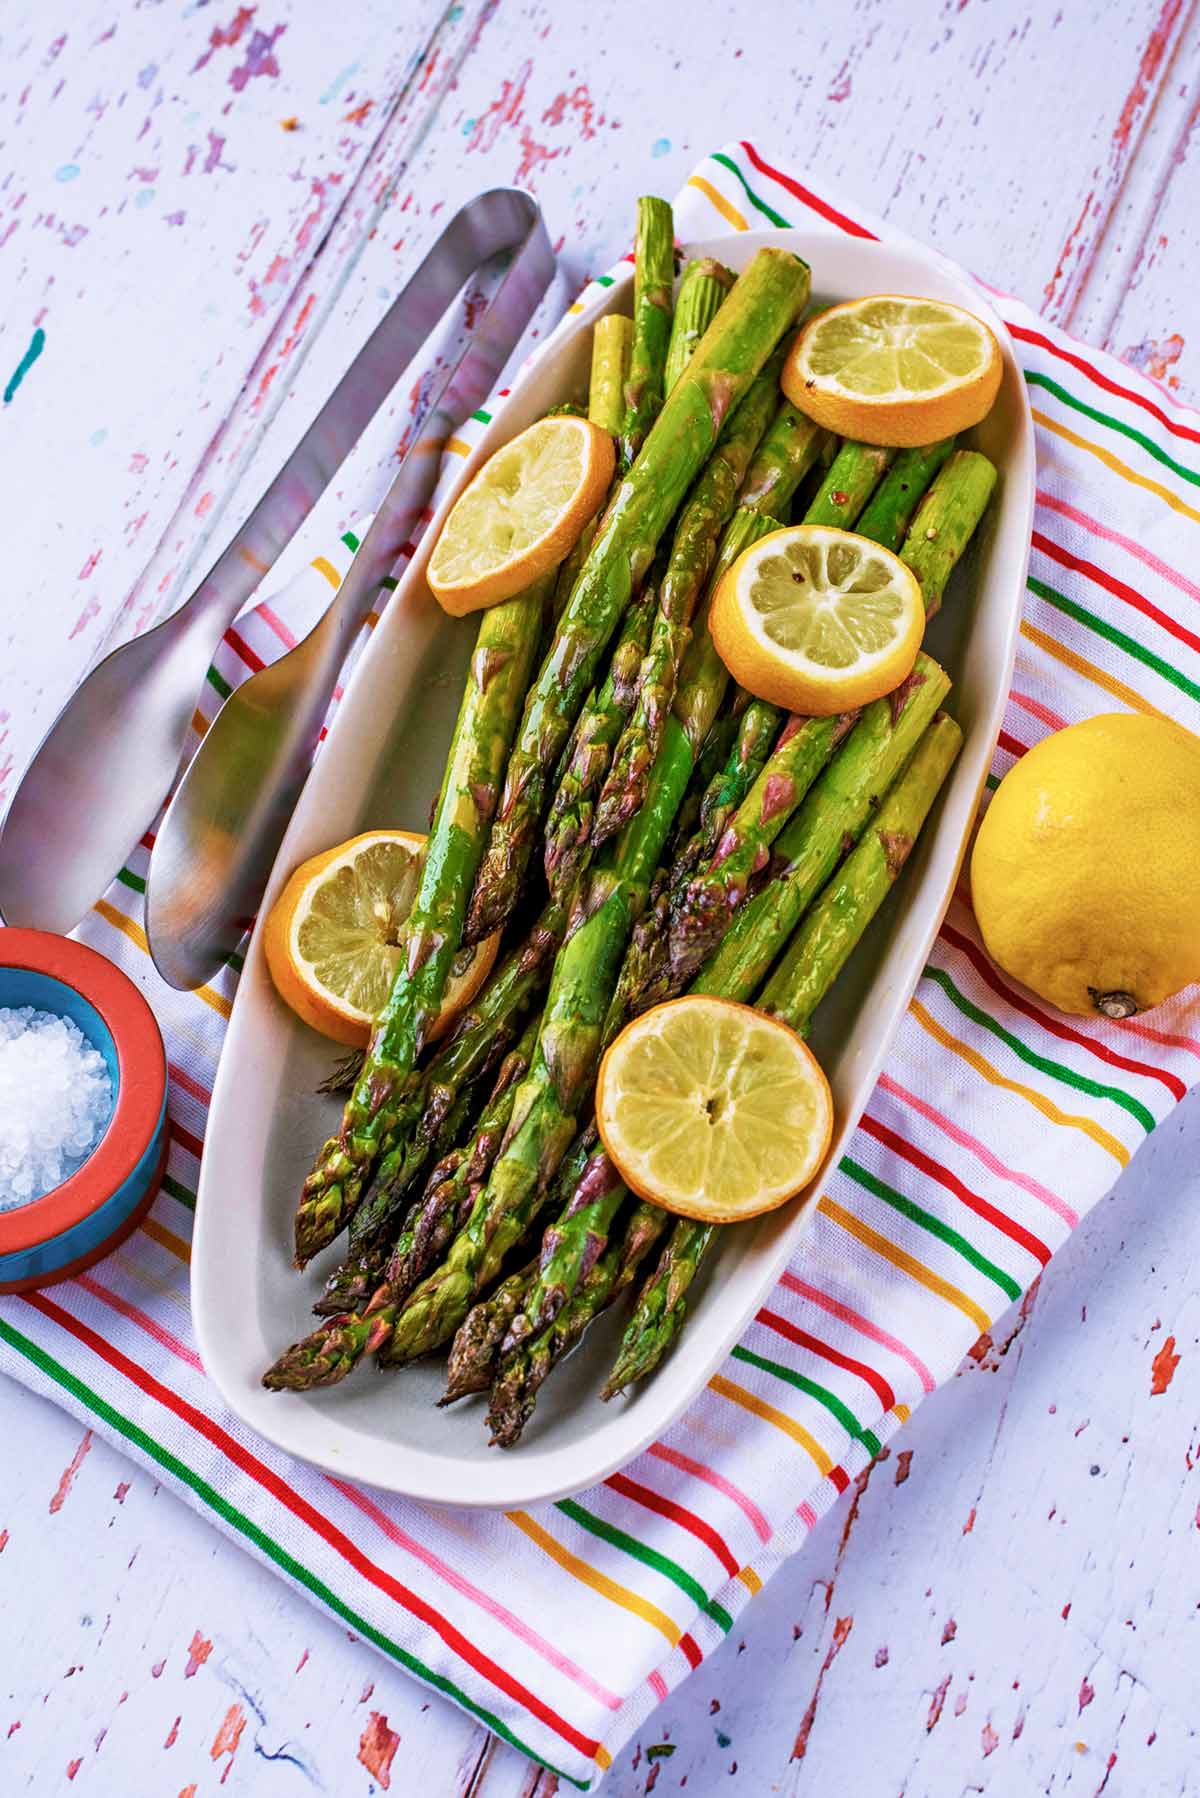 A plate of cooked asparagus and lemon slices on a plate sat on a striped towel.